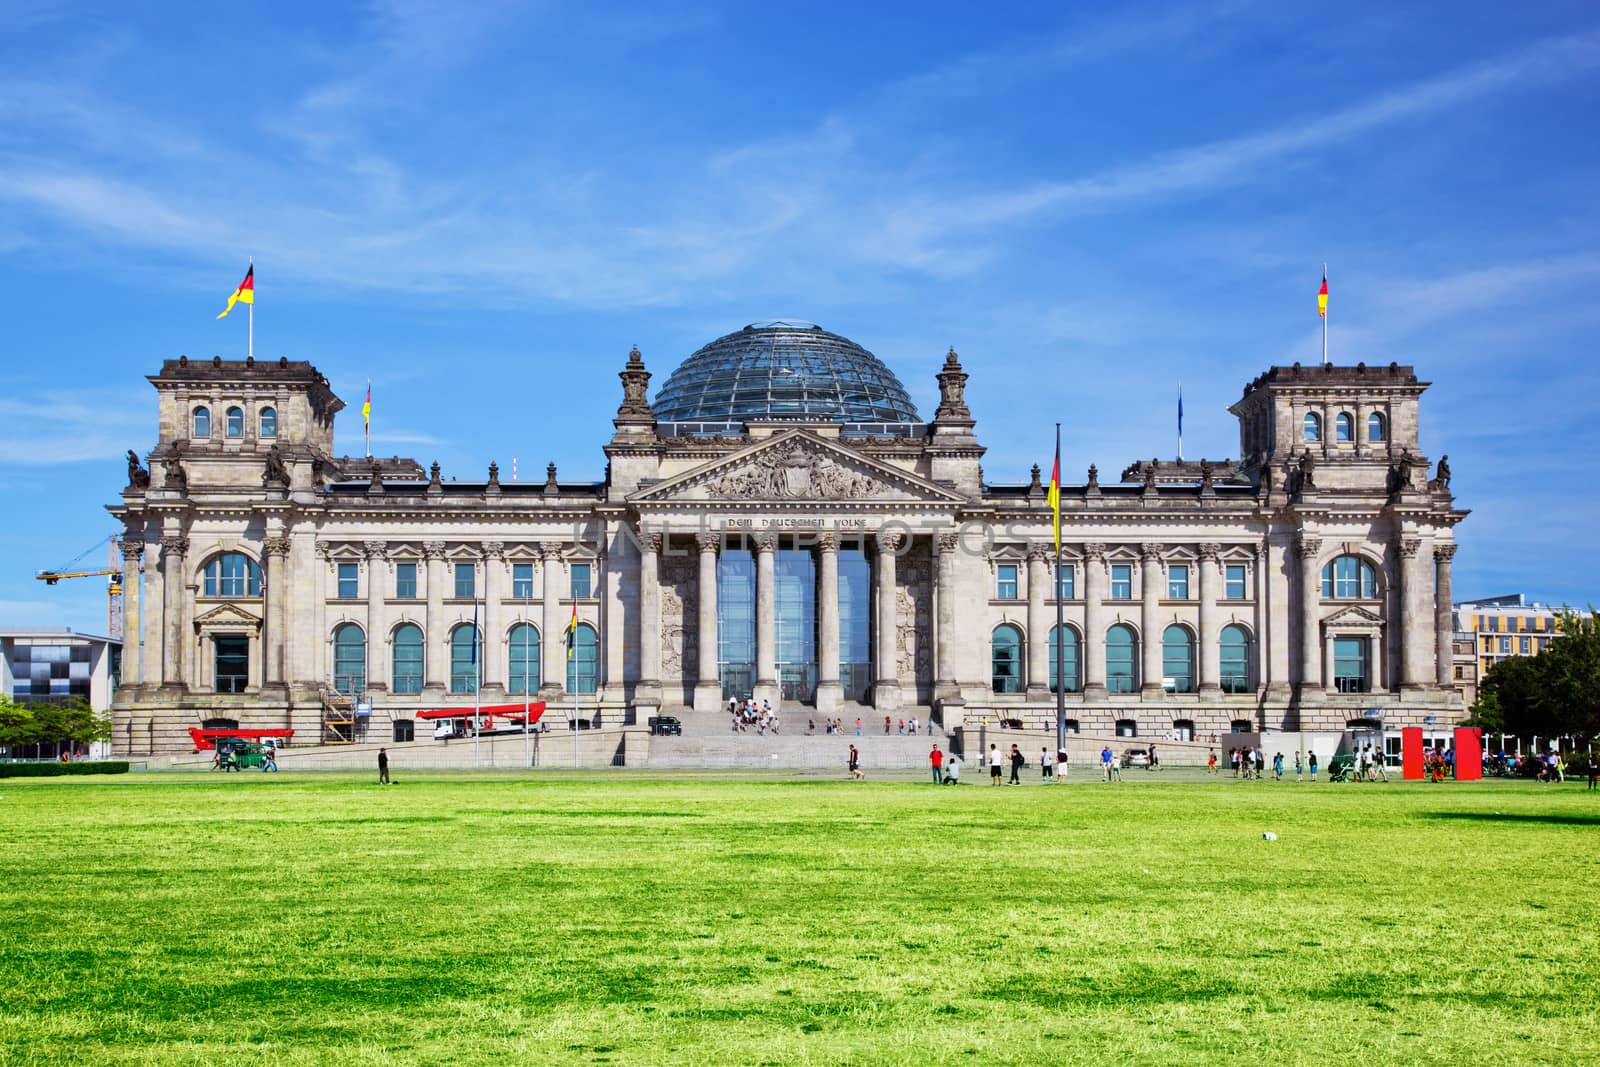 The Reichstag building of the German parliament Bundestag in Berlin, Germany